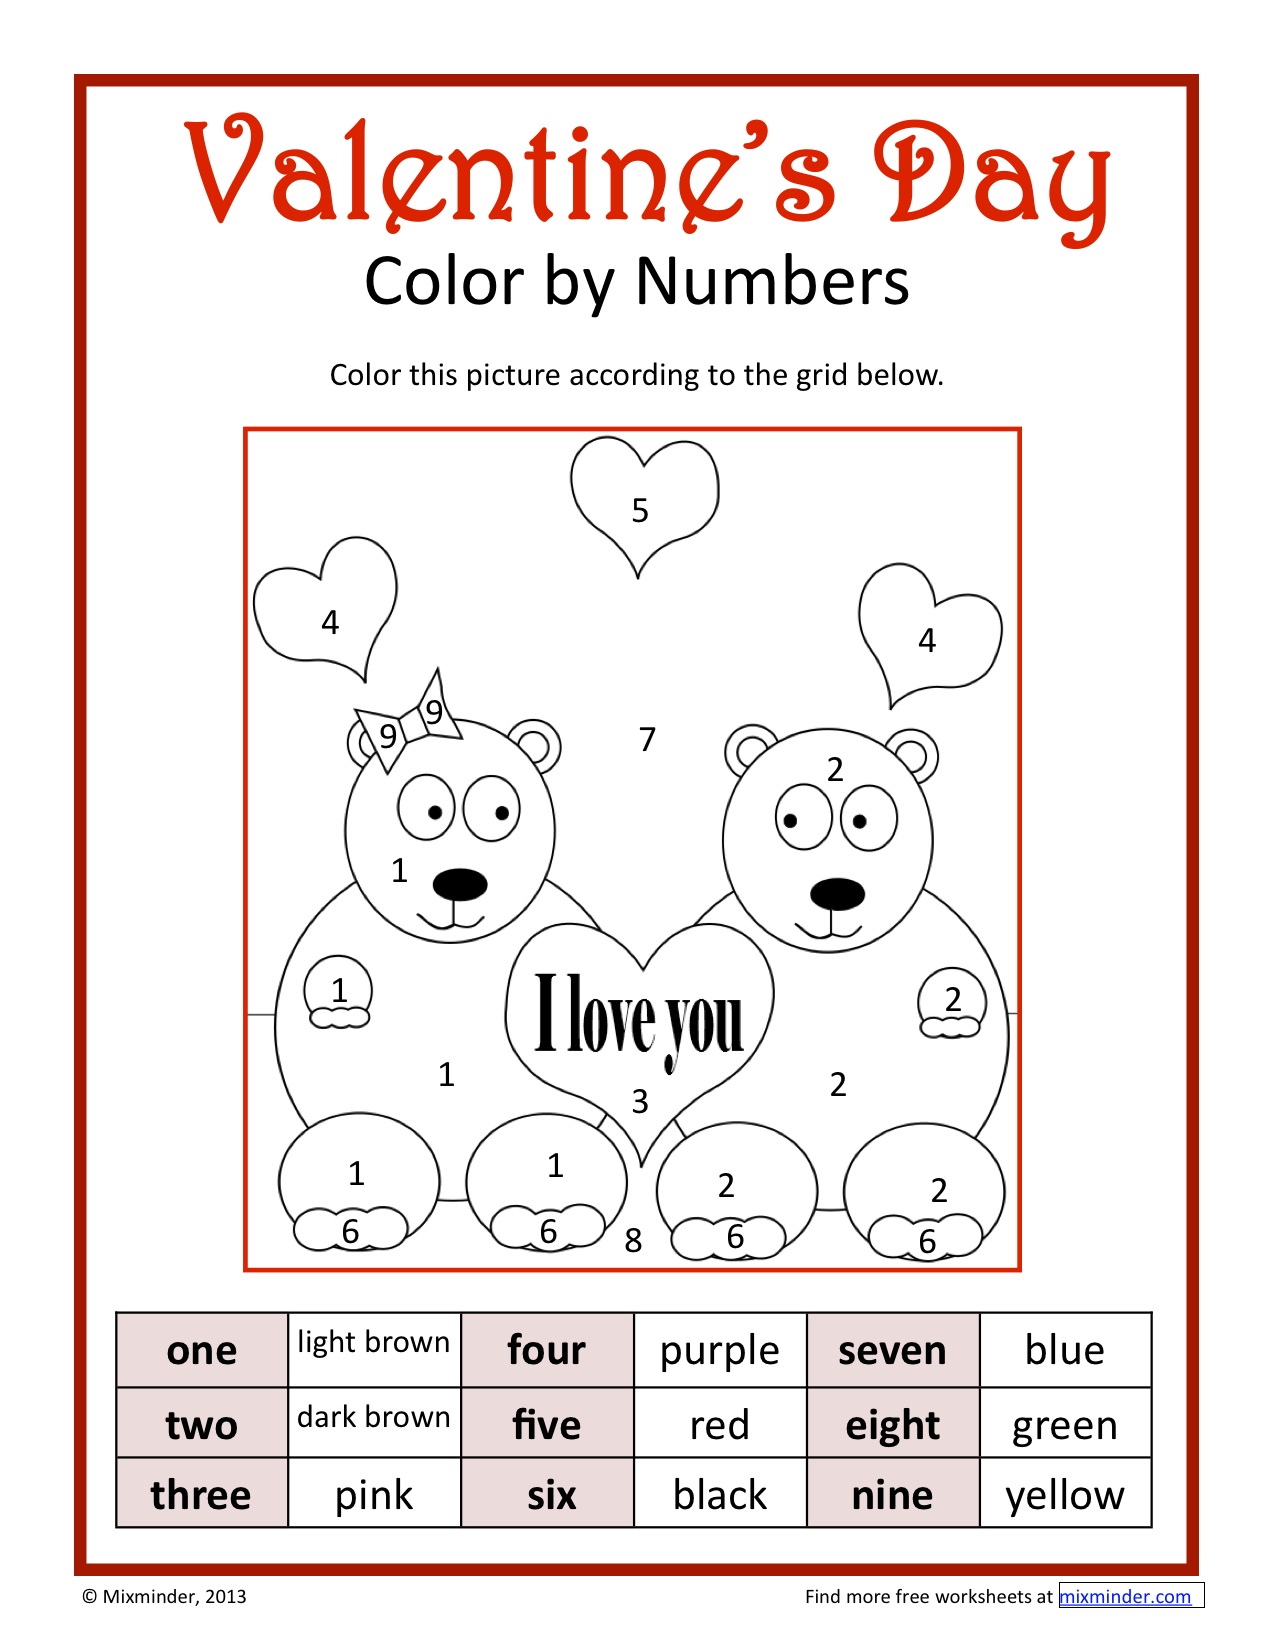 Valentine’s Day Color by Numbers